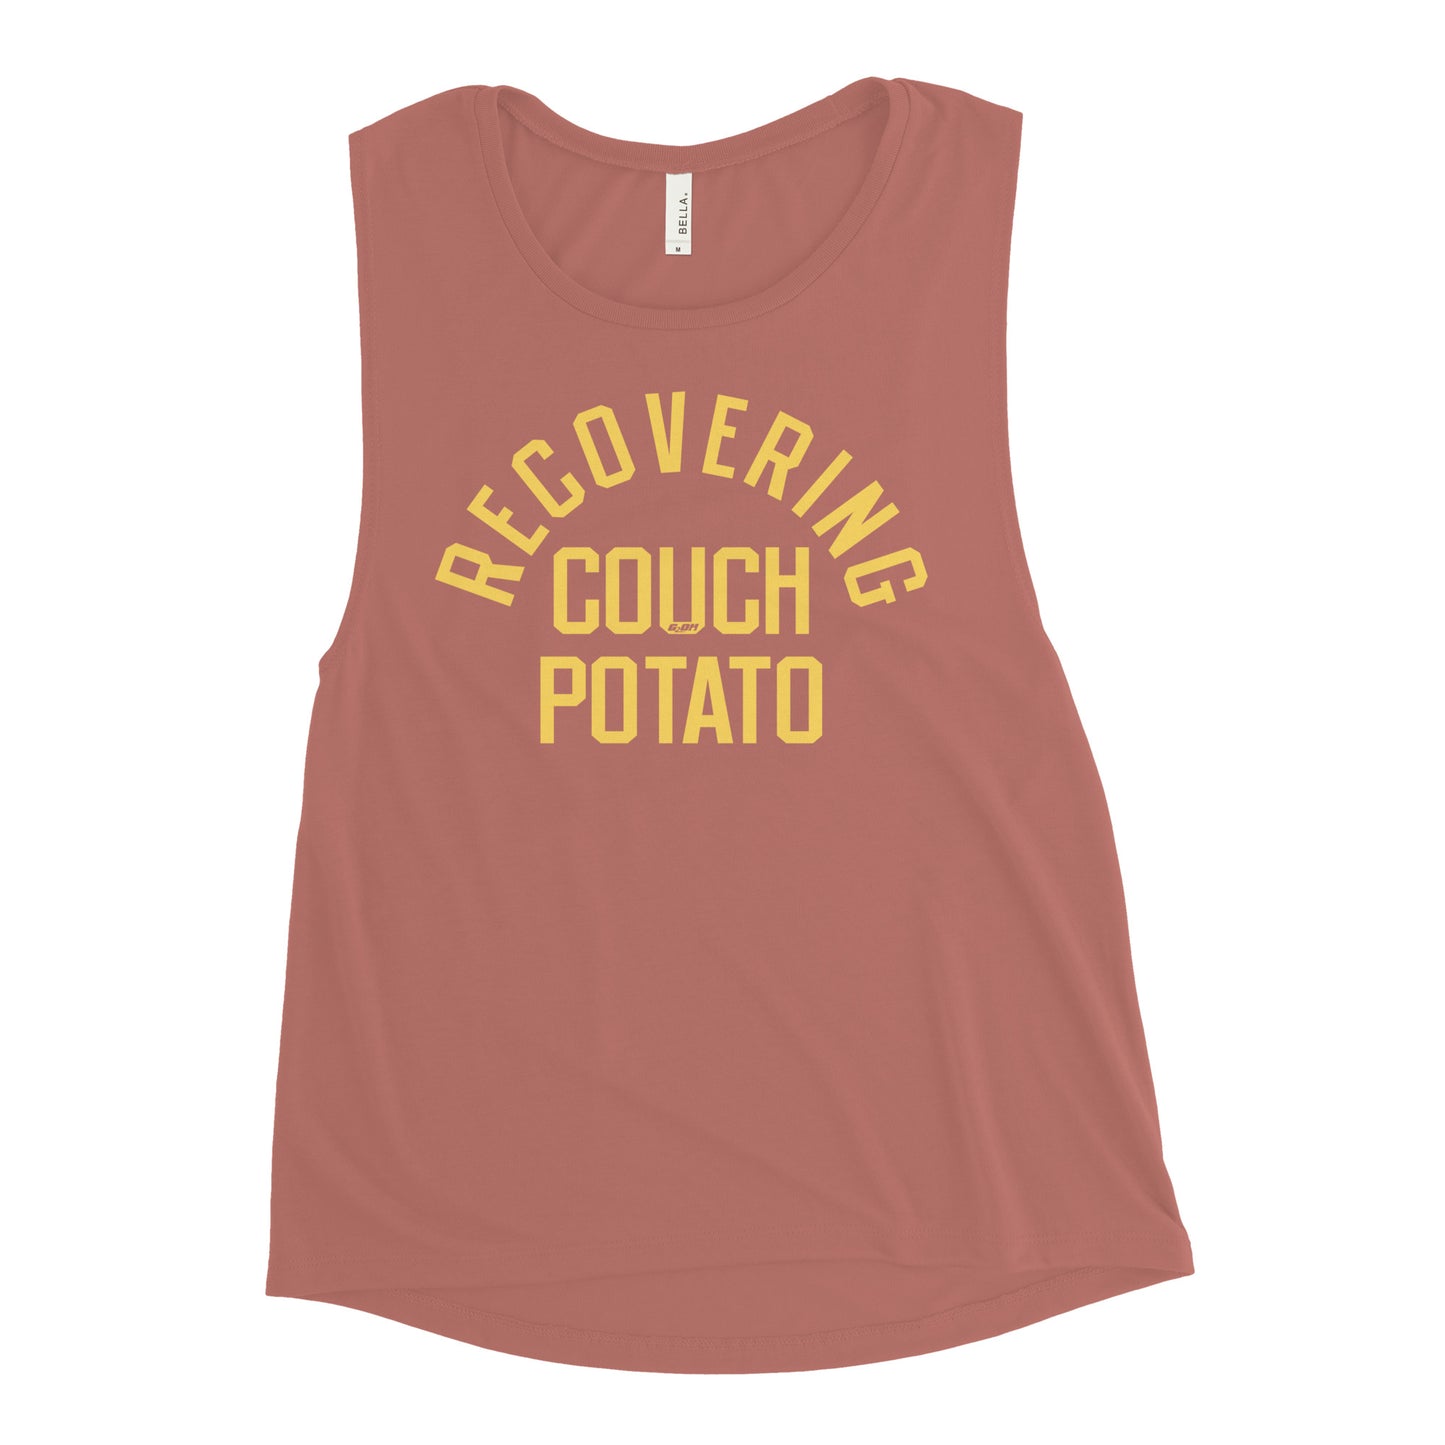 Recovering Couch Potato Women's Muscle Tank